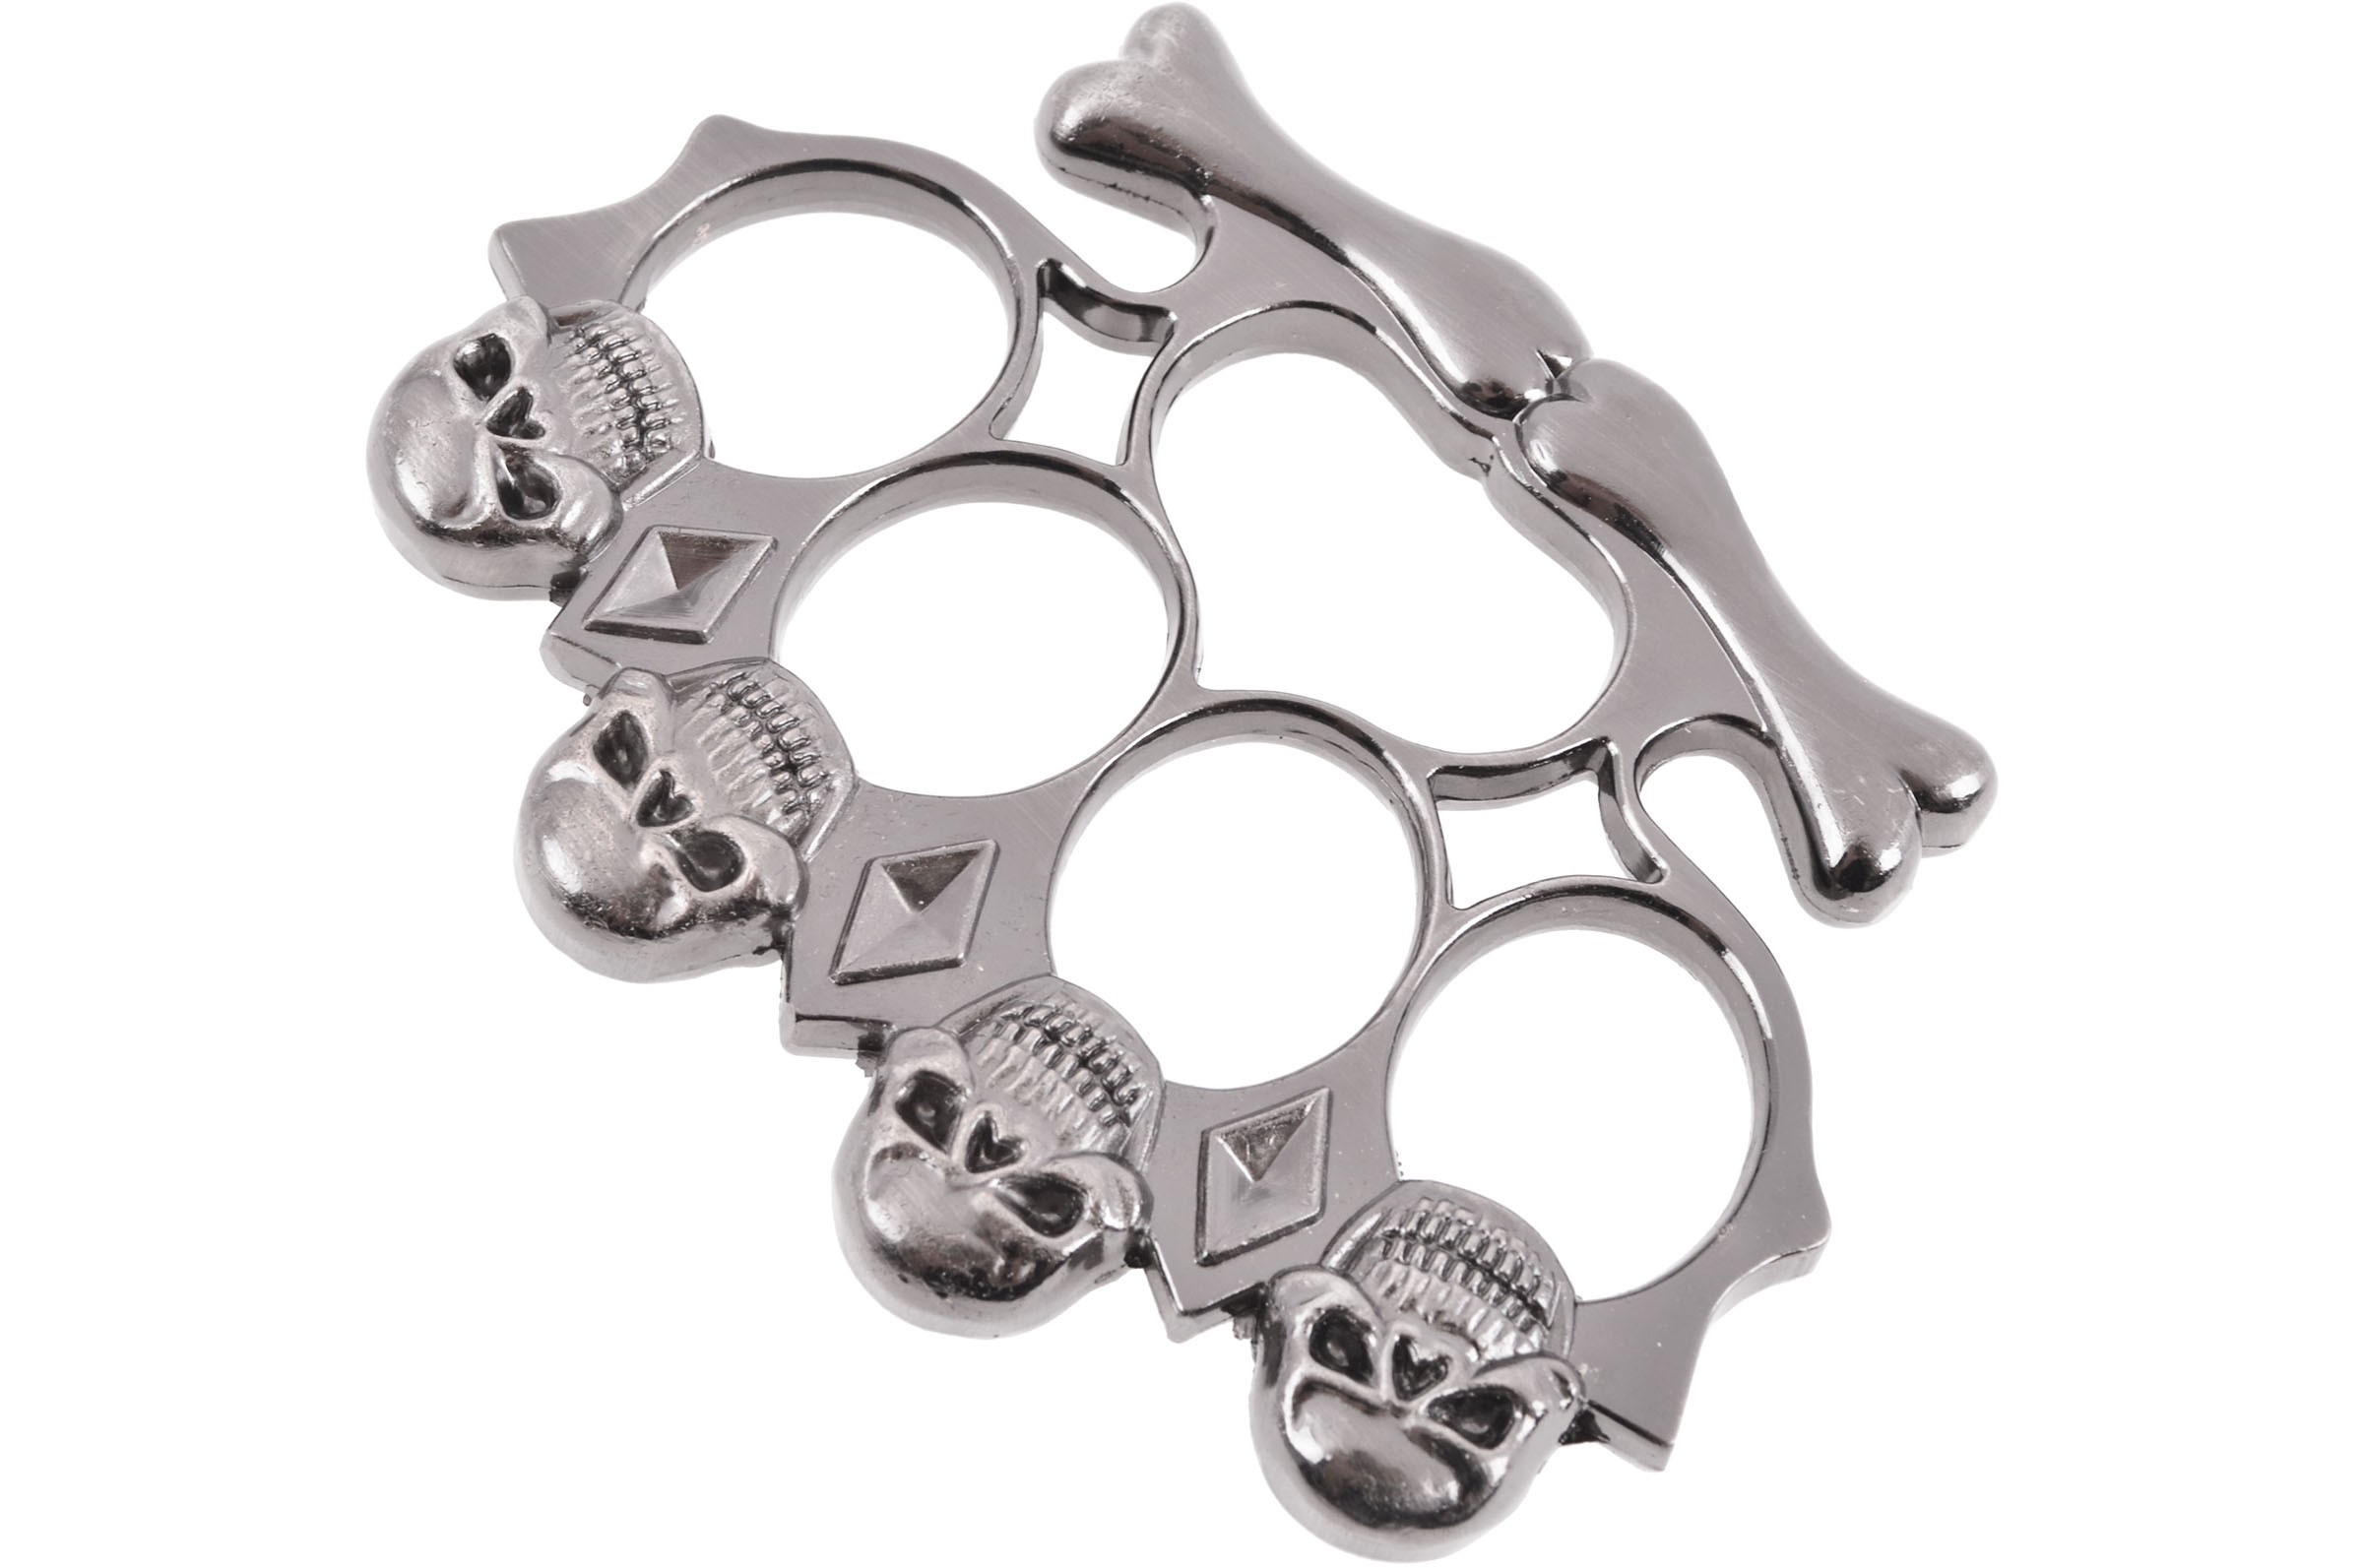 Single Finger Titanium Knuckle Duster Ring TC4 Self Defense Punch Daggers  Outdoor Knuckle Survival Pocket EDC Knuck Knuckles Multi Tools From  Chinaoutdoorknives, $25.13 | DHgate.Com